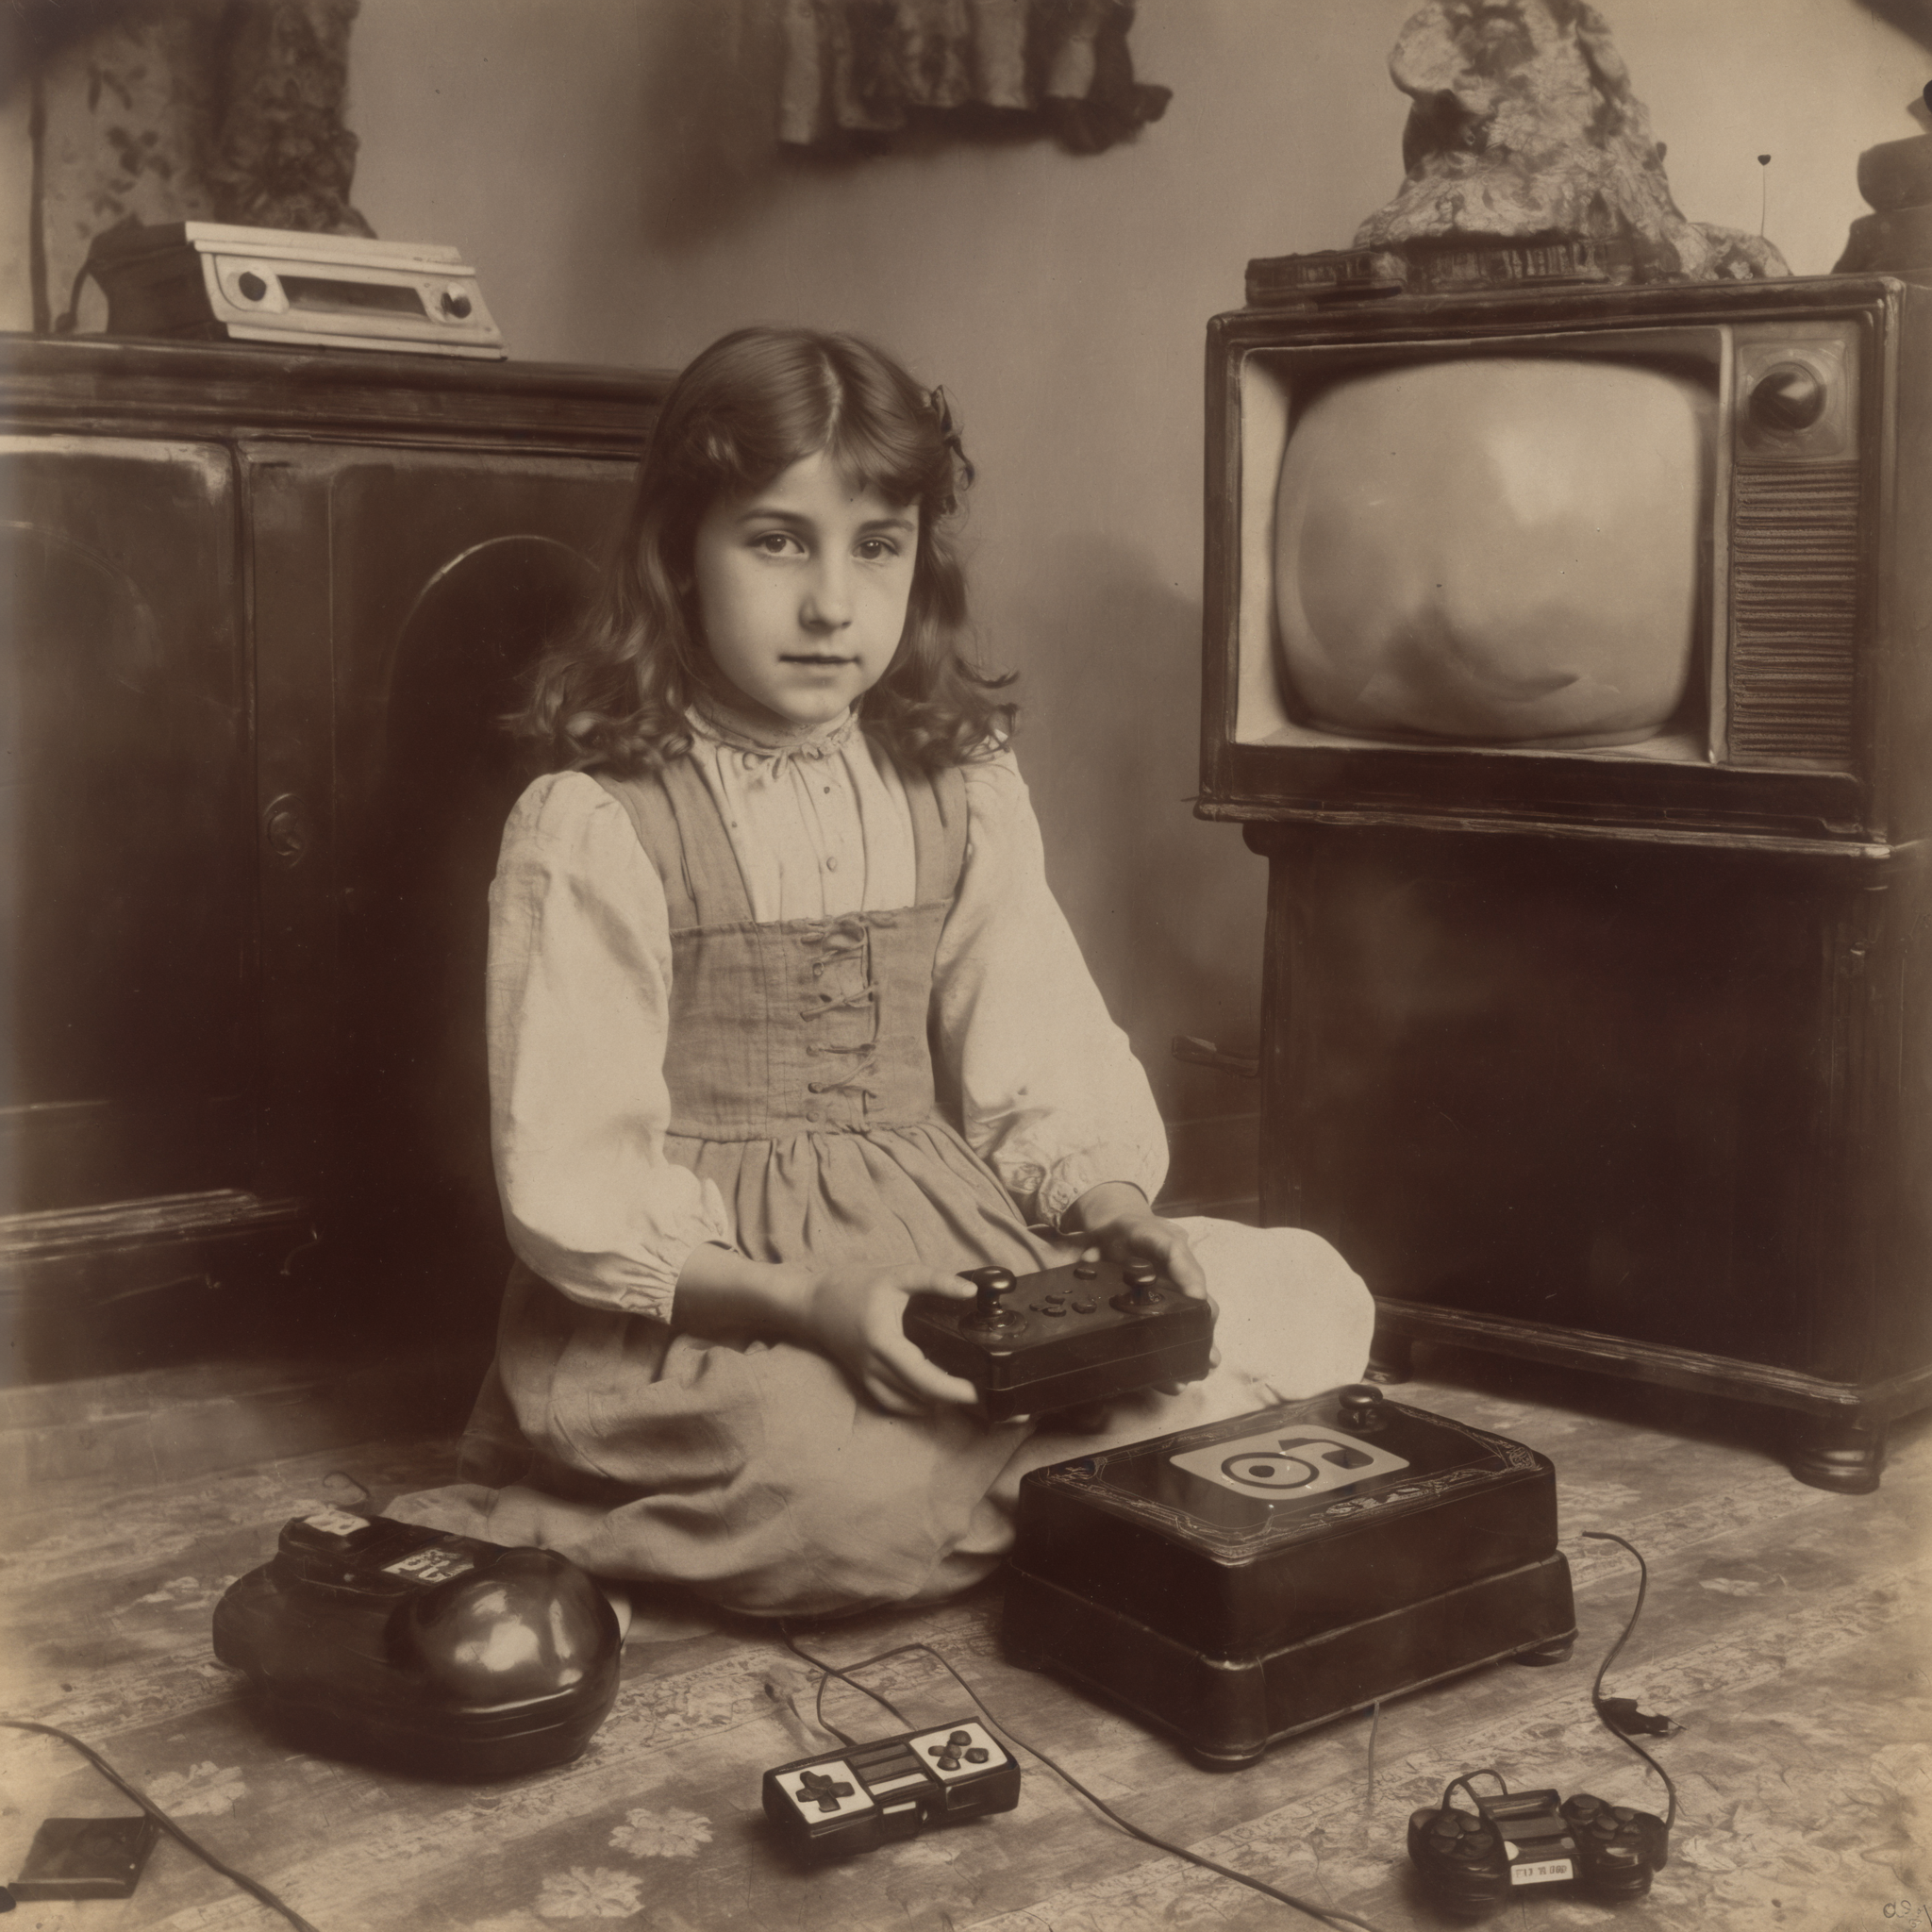 historical antique photograph of a girl sitting on the floor, holding a game controller, playing a retro game on a commodore 64 game console and a television, by Eugène Atget